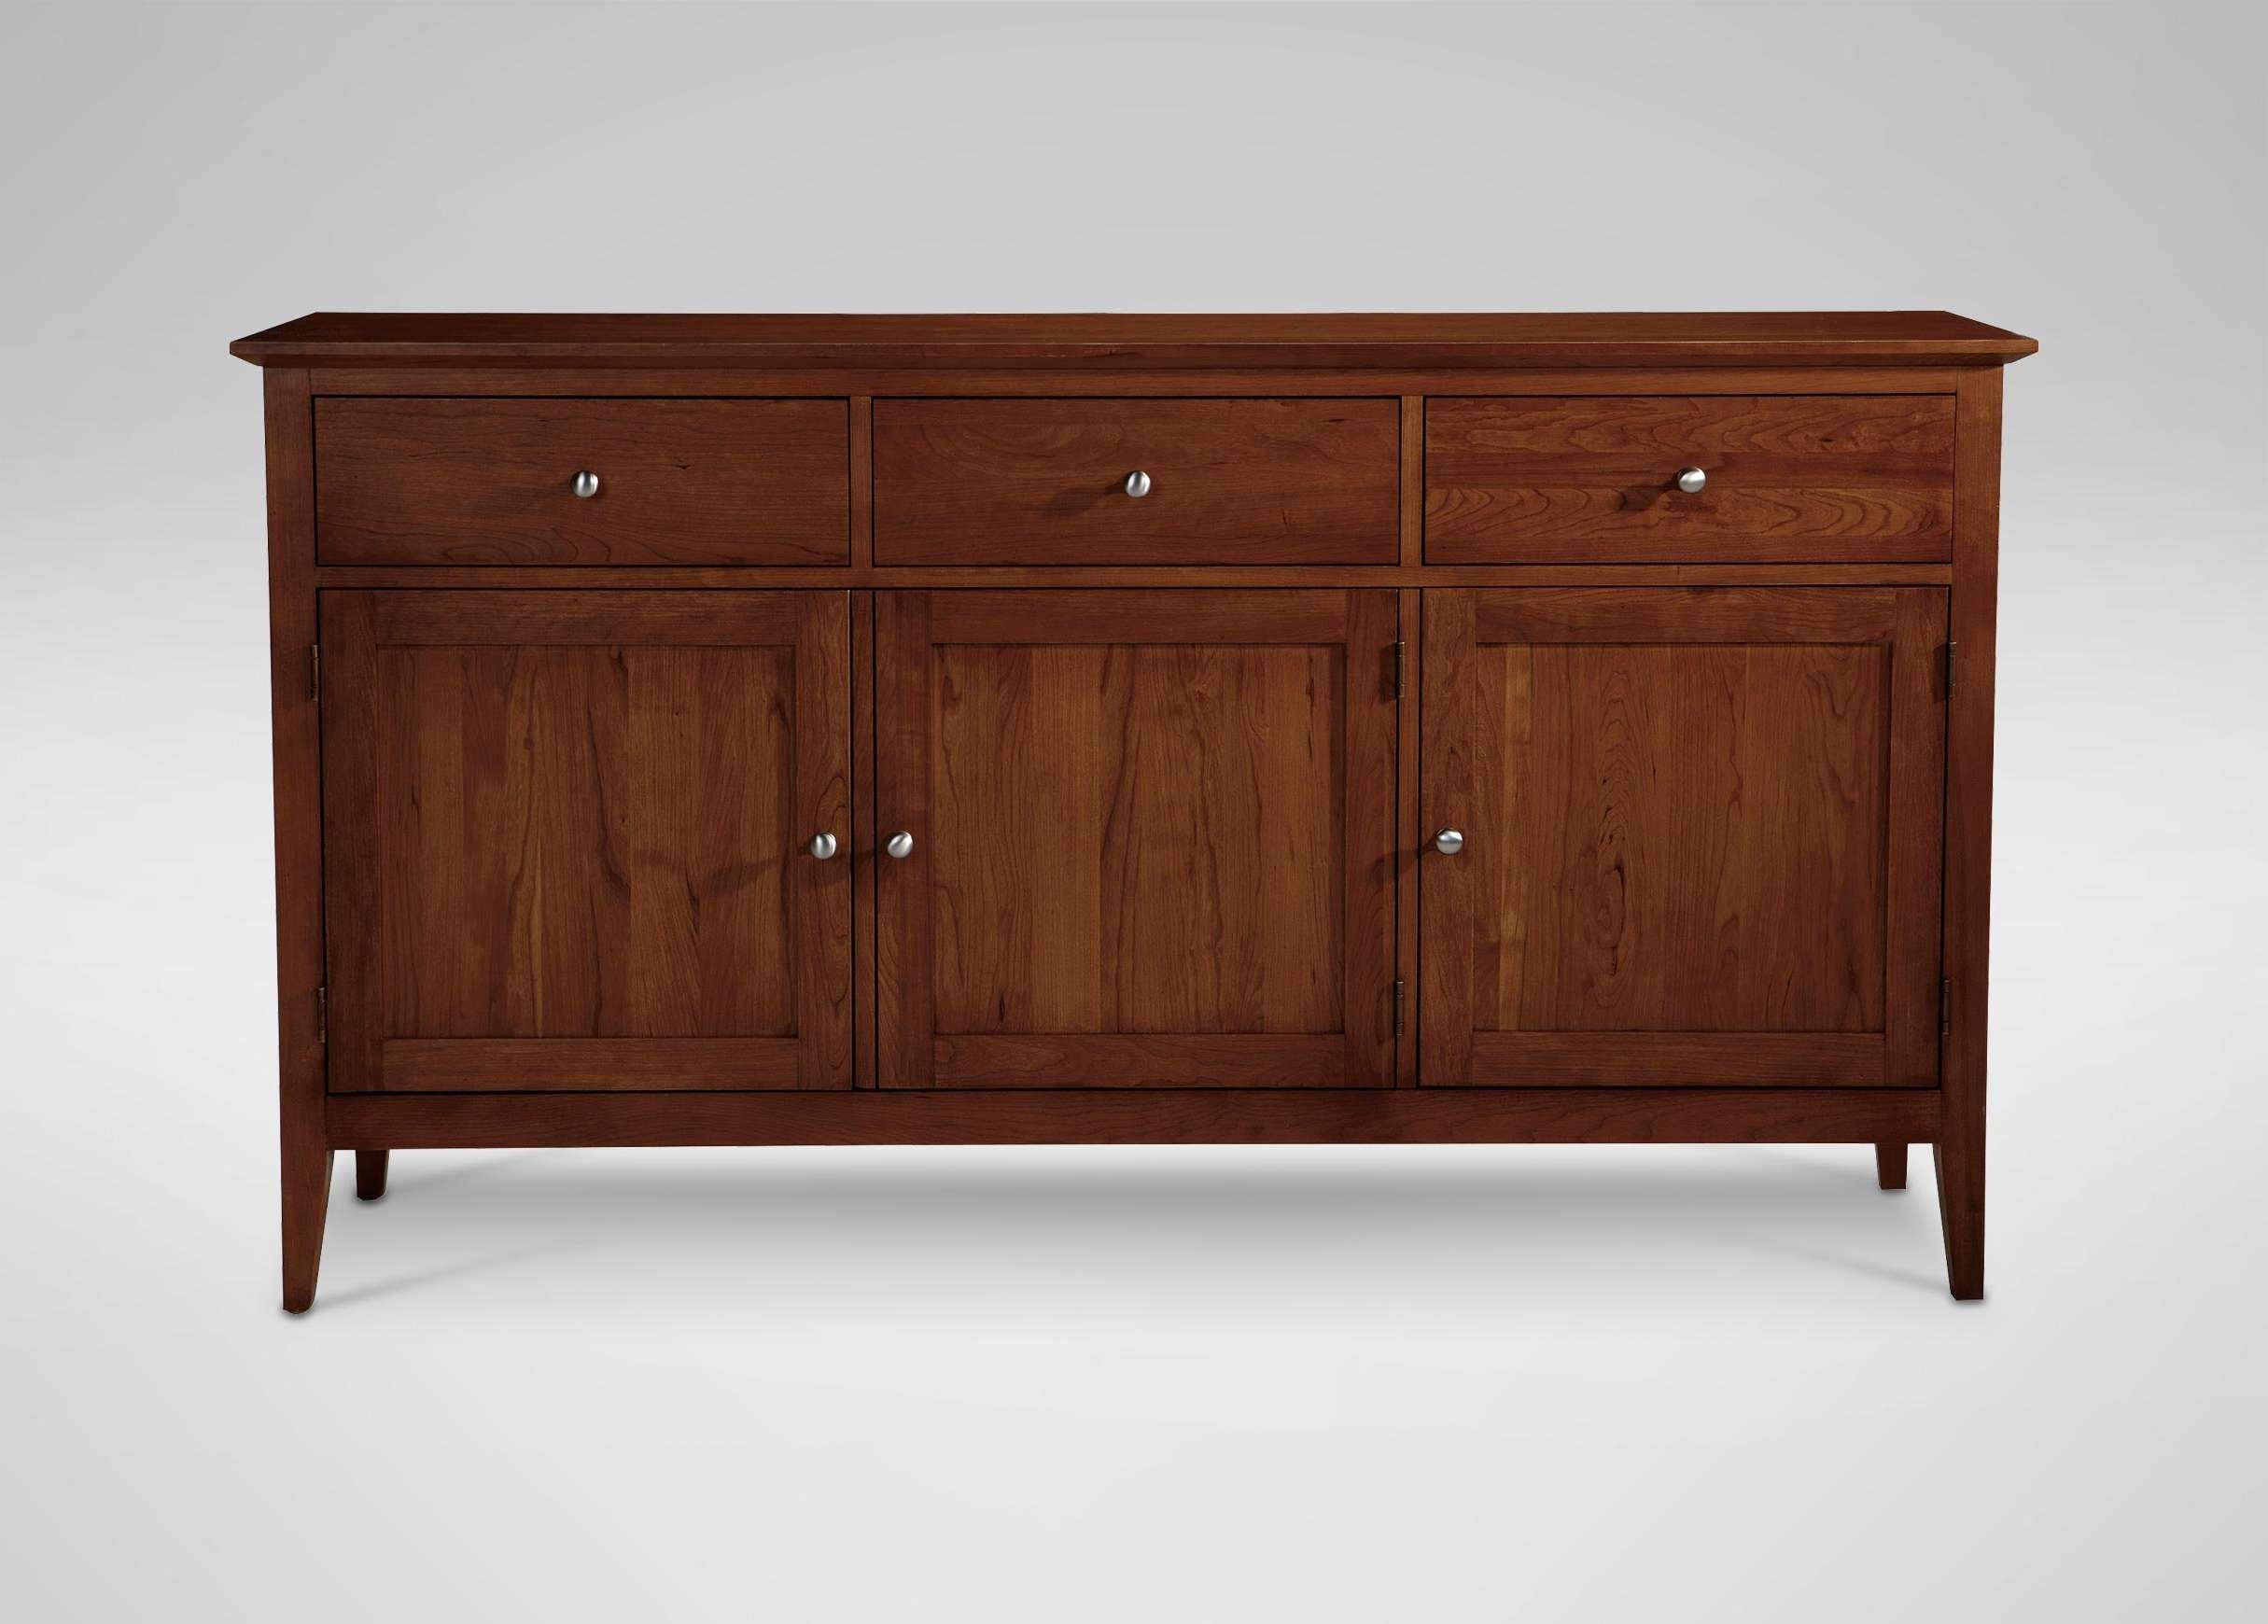 Rowan Buffet | Buffets, Sideboards & Servers Pertaining To Magic Sideboards (View 9 of 24)